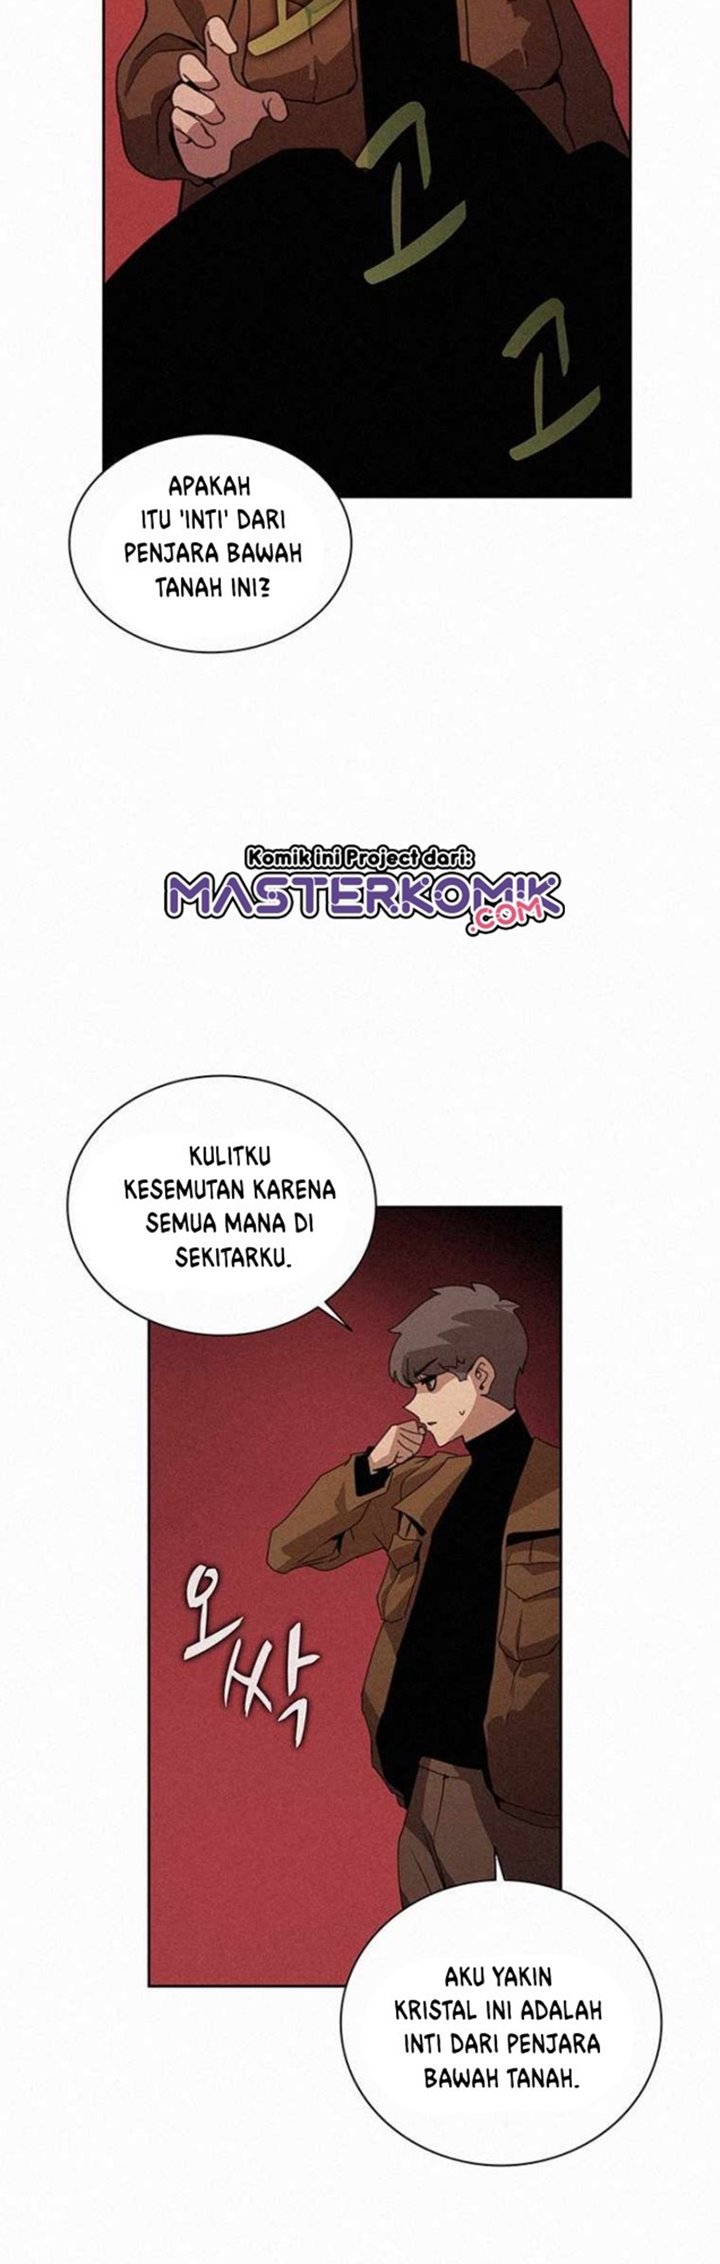 The Book Eating Magician (Book Eater) Chapter 41